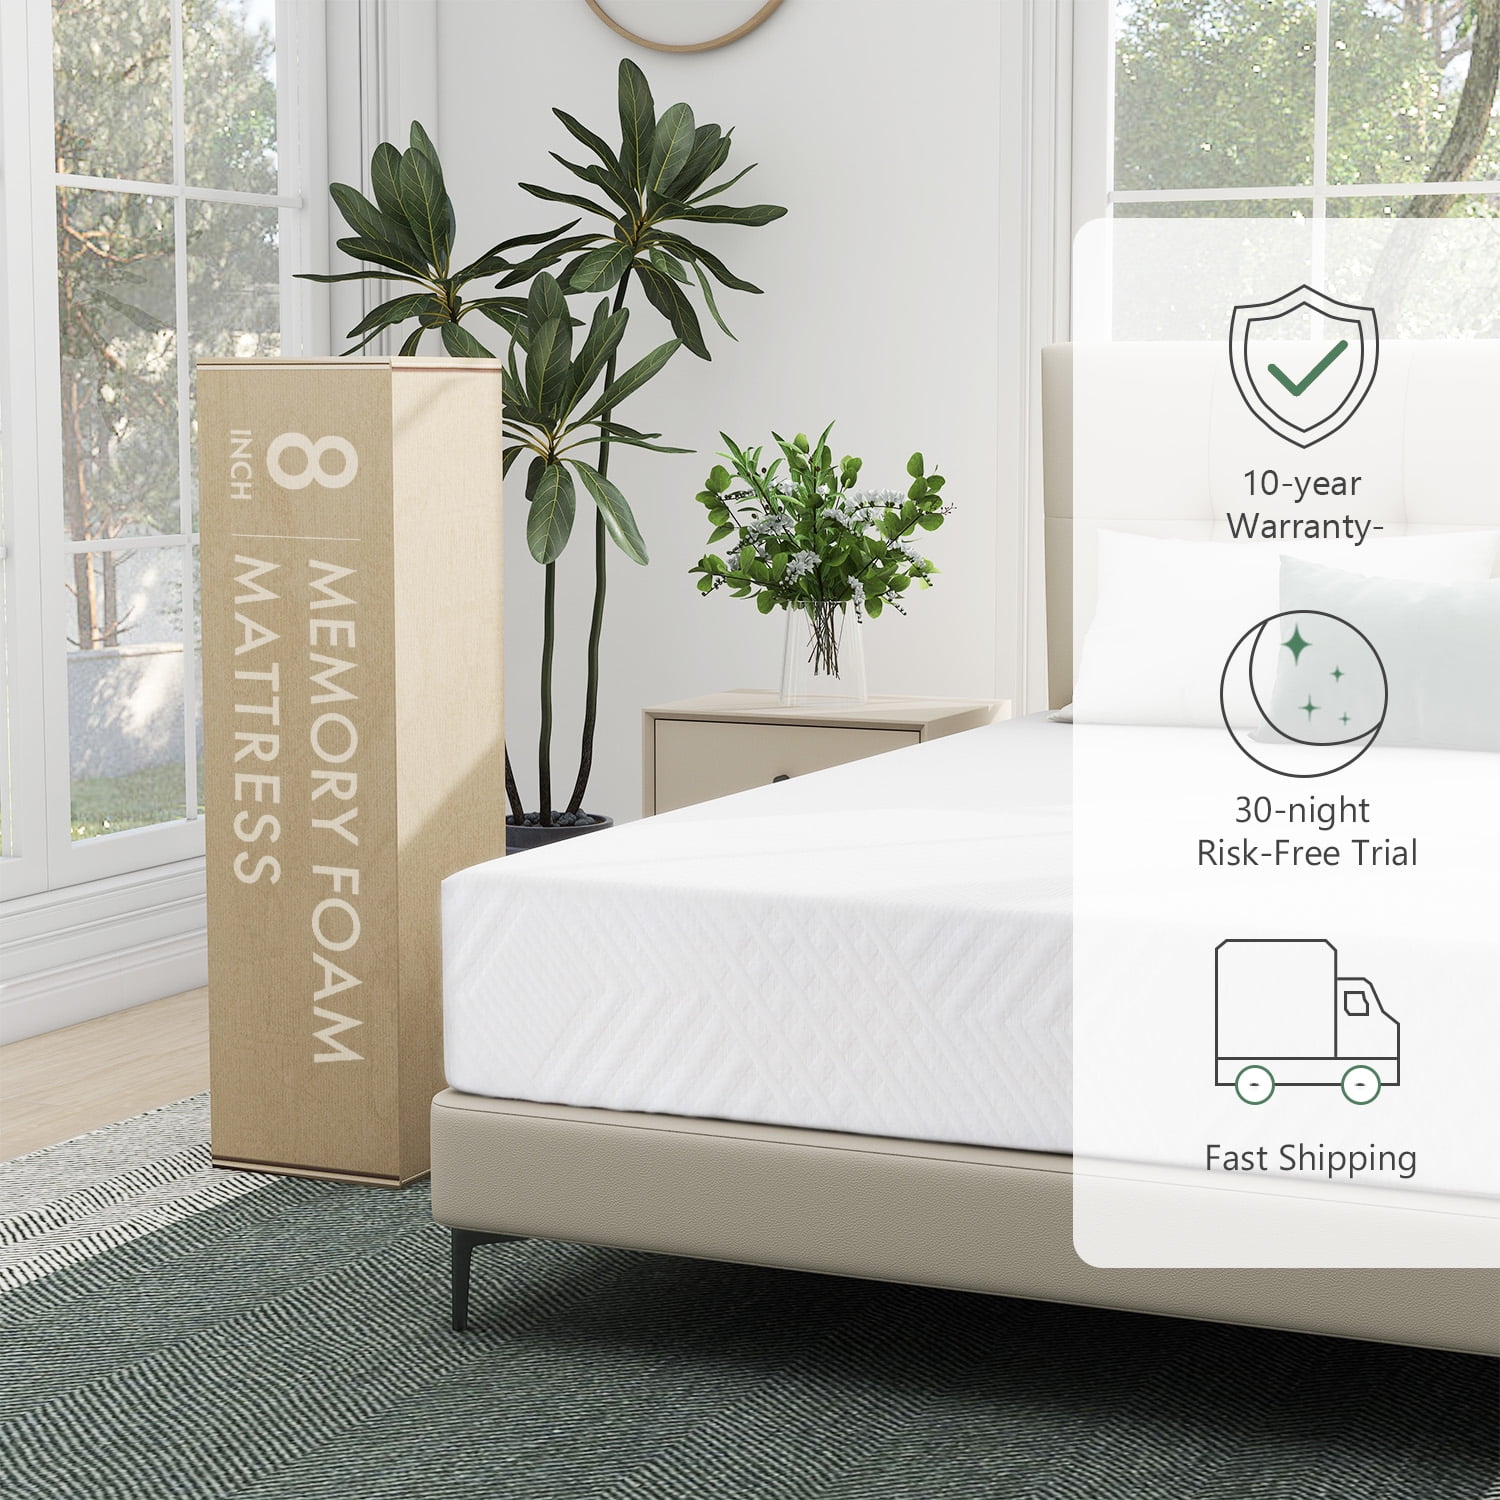 American Mattress Company 6 Graphite Infused Memory Foam-Sleeps  Cooler-100% Made in The USA-Medium Firm (Short King - 72x75)